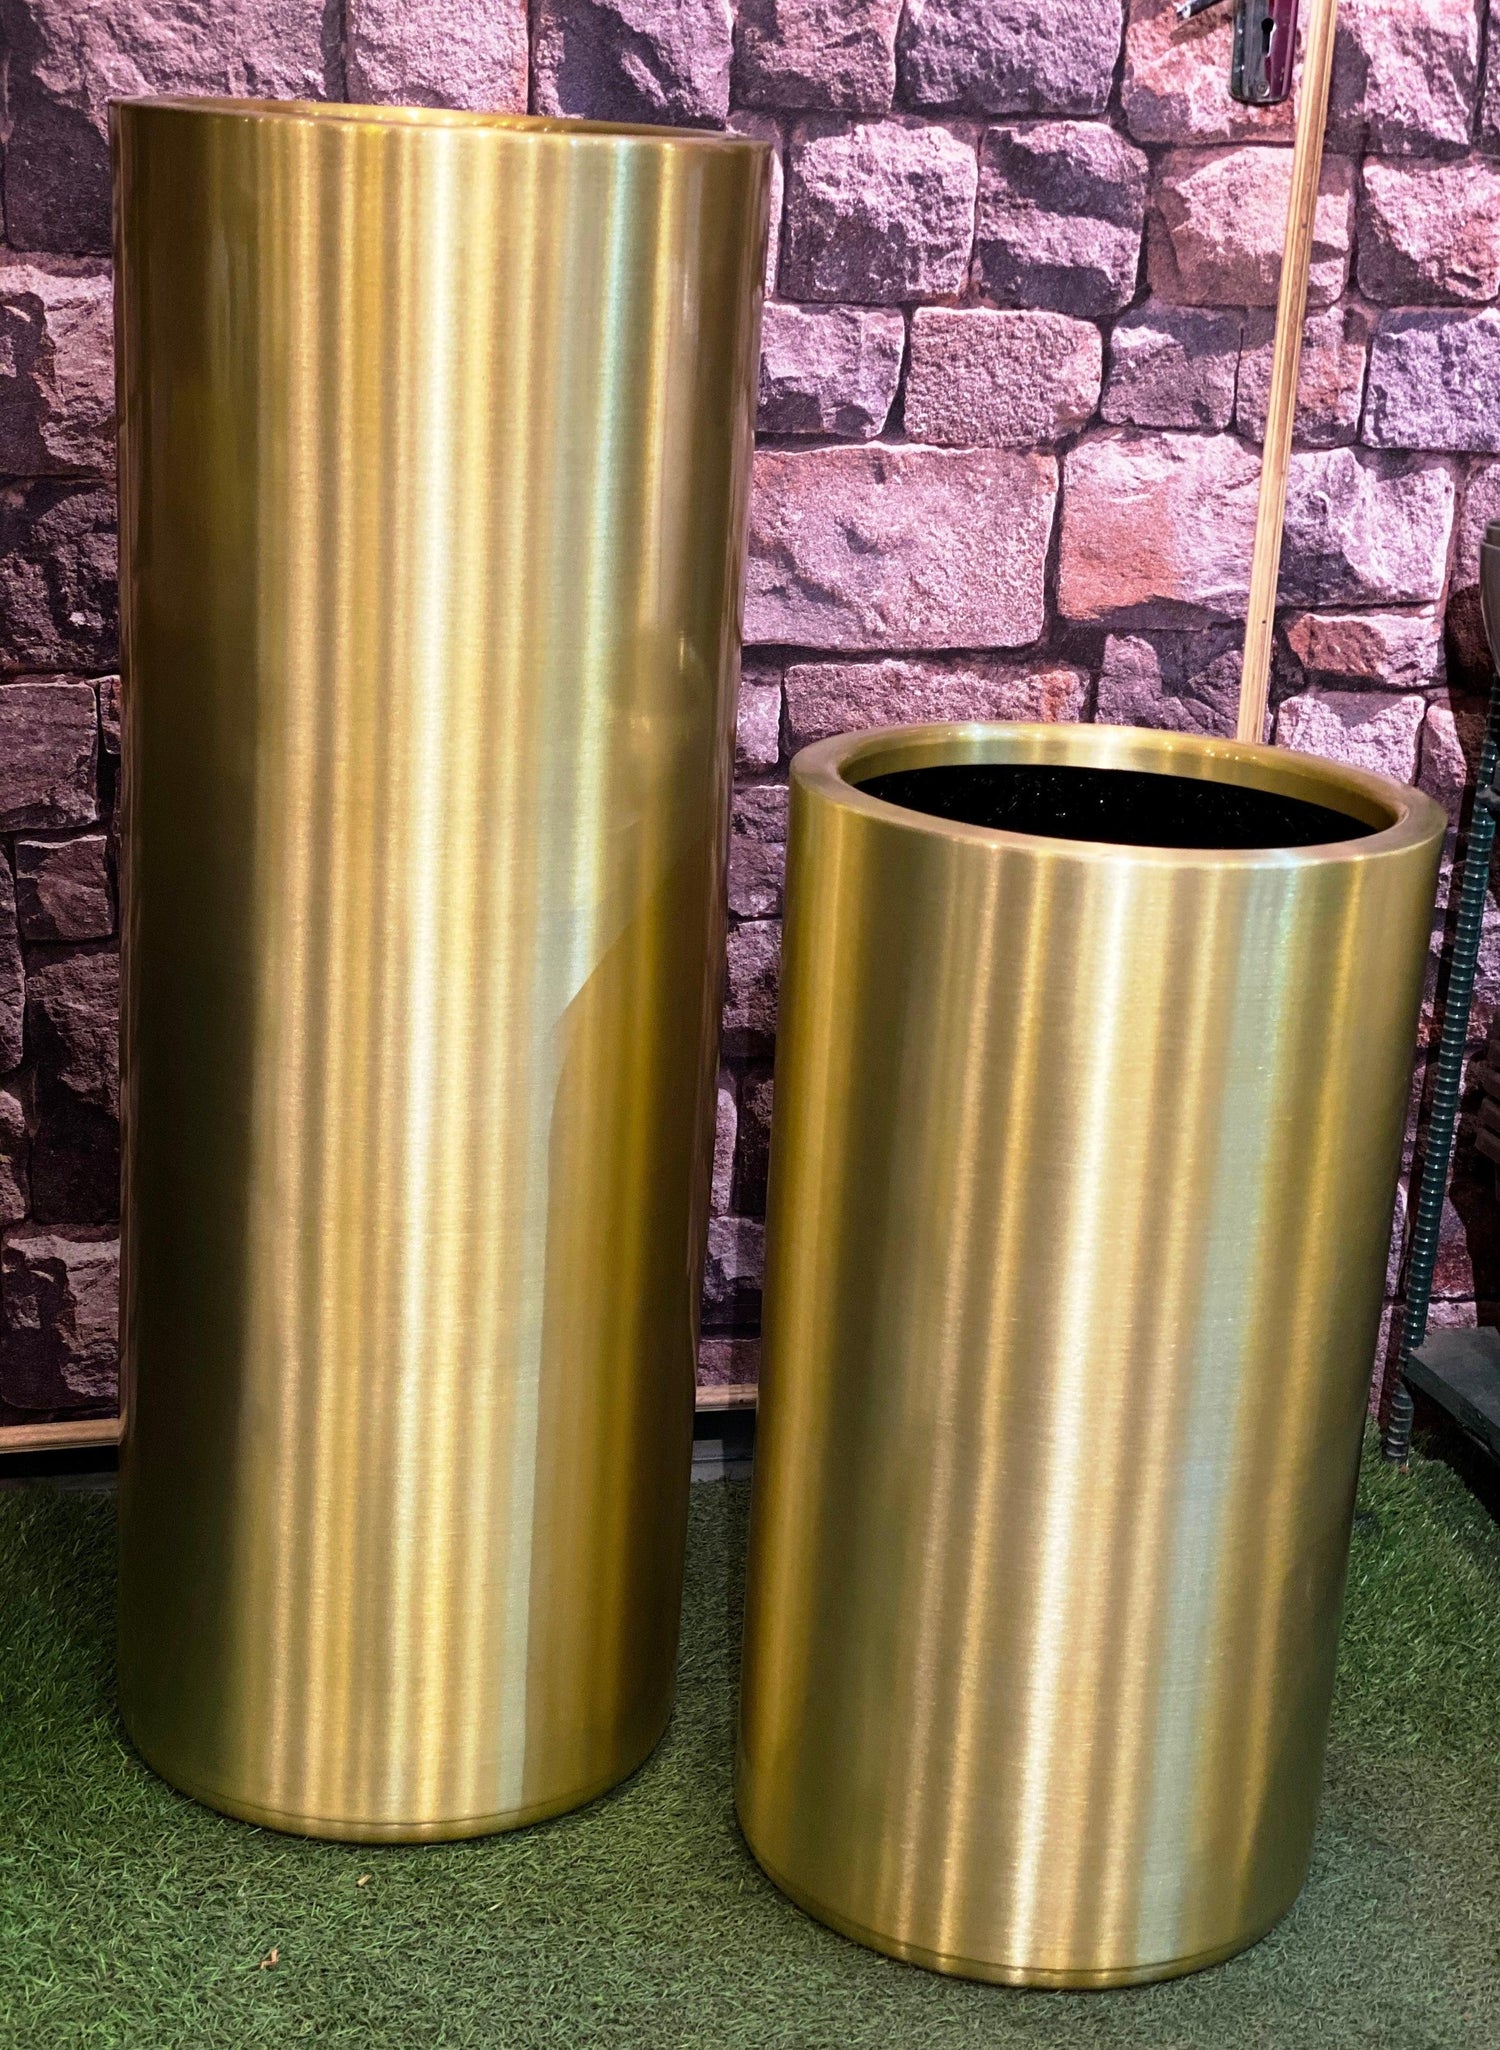 Aluminum Cylindro with LIP Planter - Gold &amp; Chrome - THE GARDEN CENTRE